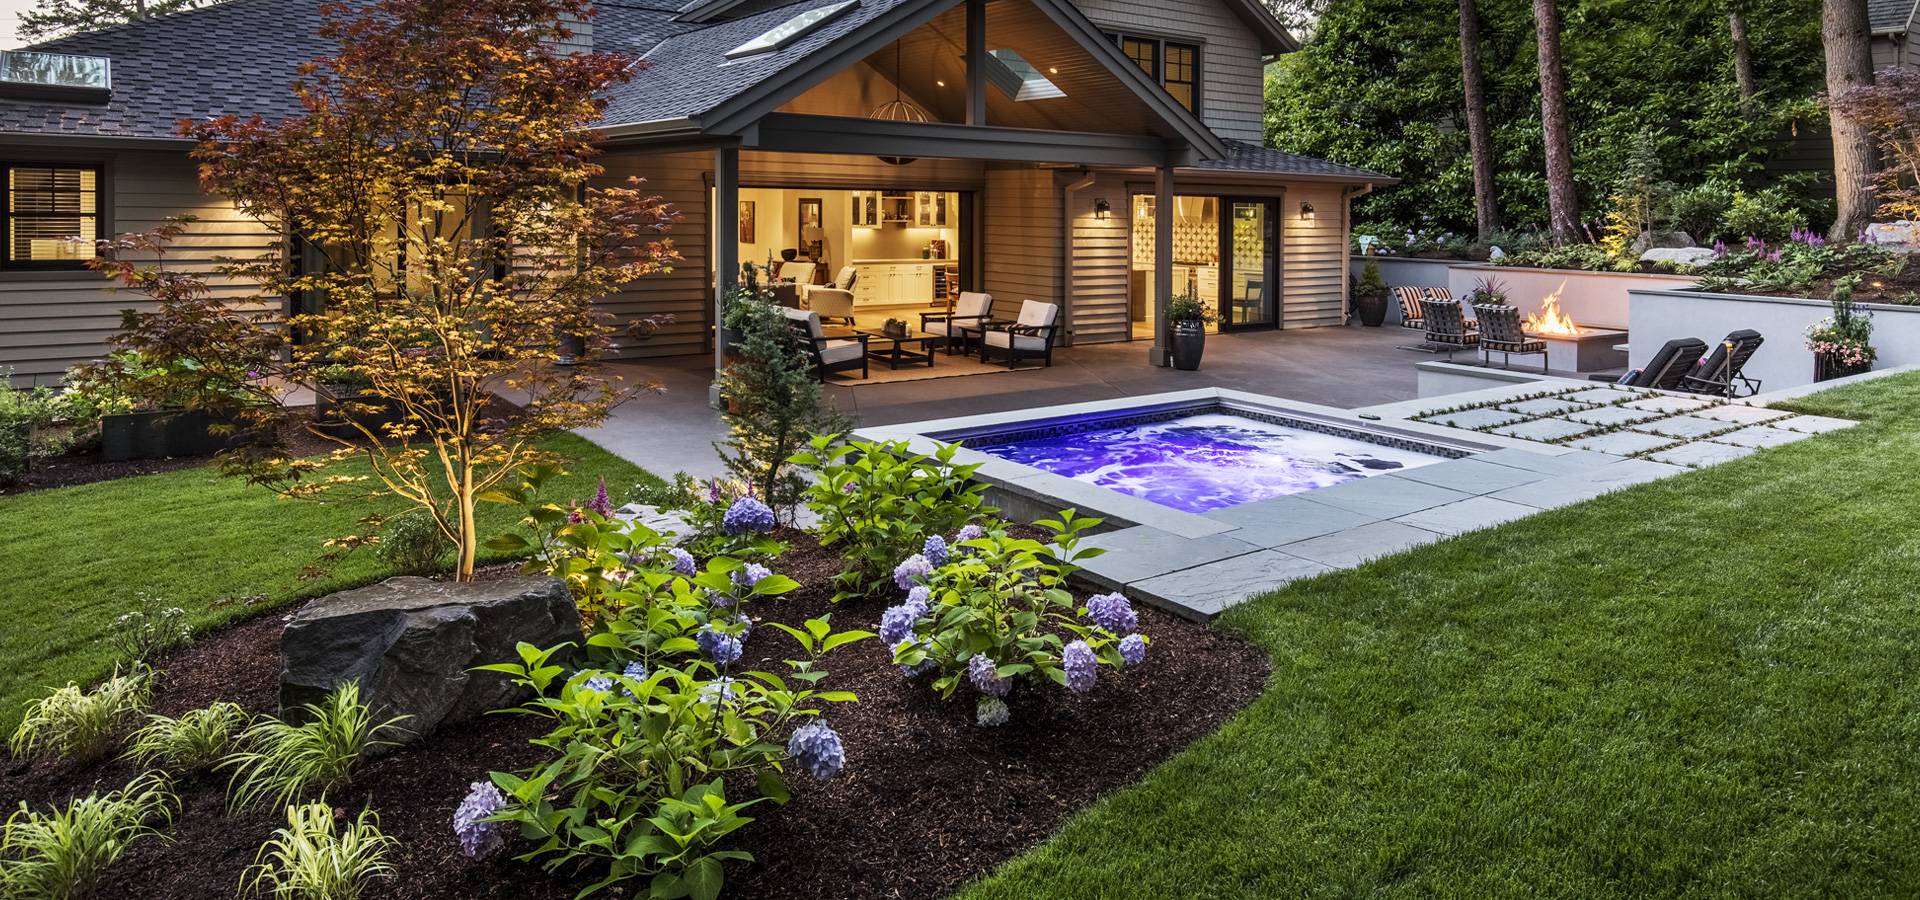  patio, pool, firepit, and stones in backyard